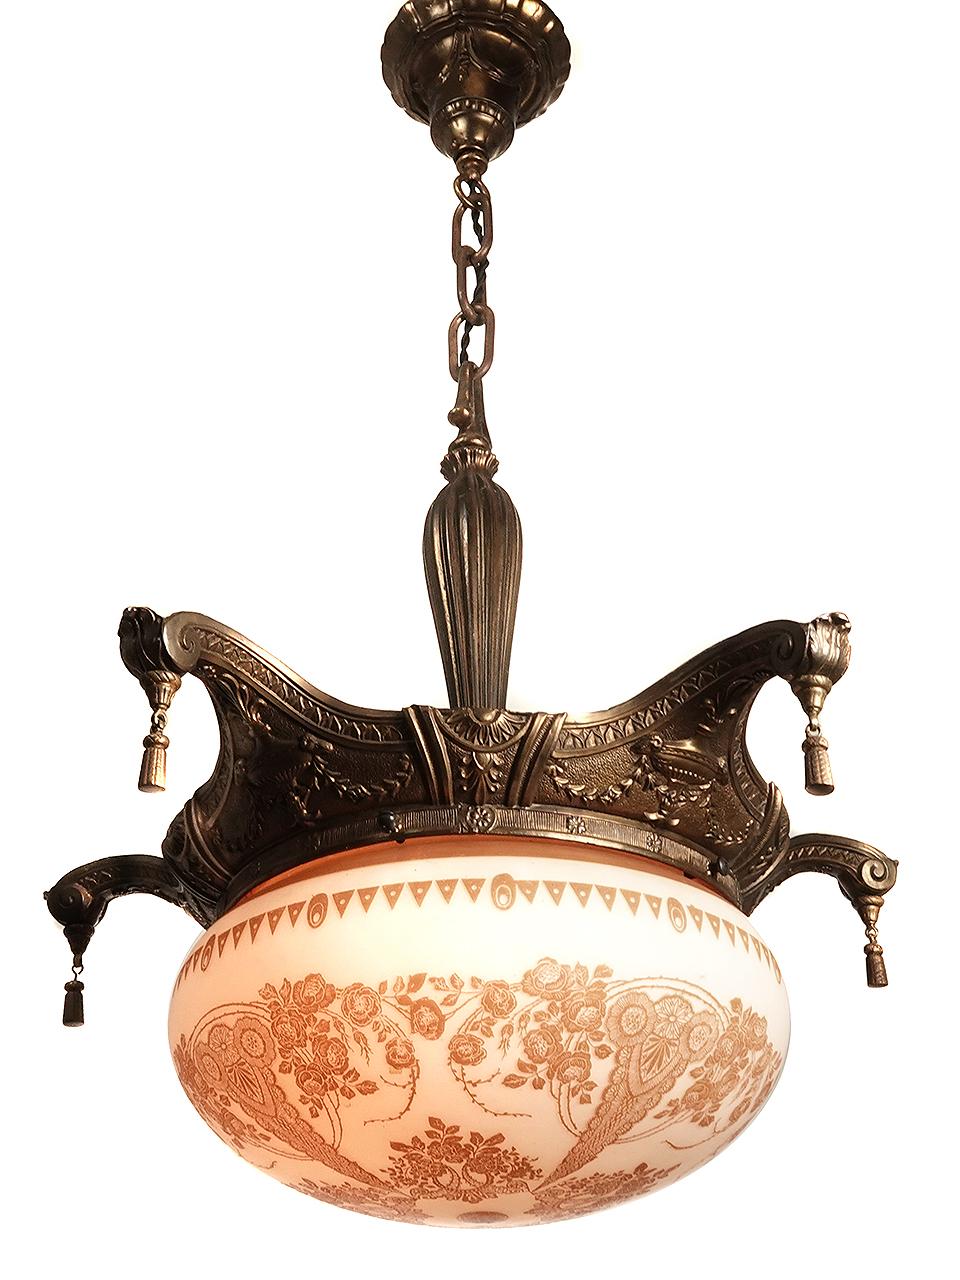 American Ornate Pendent with Full Floral Stenciled Globe For Sale